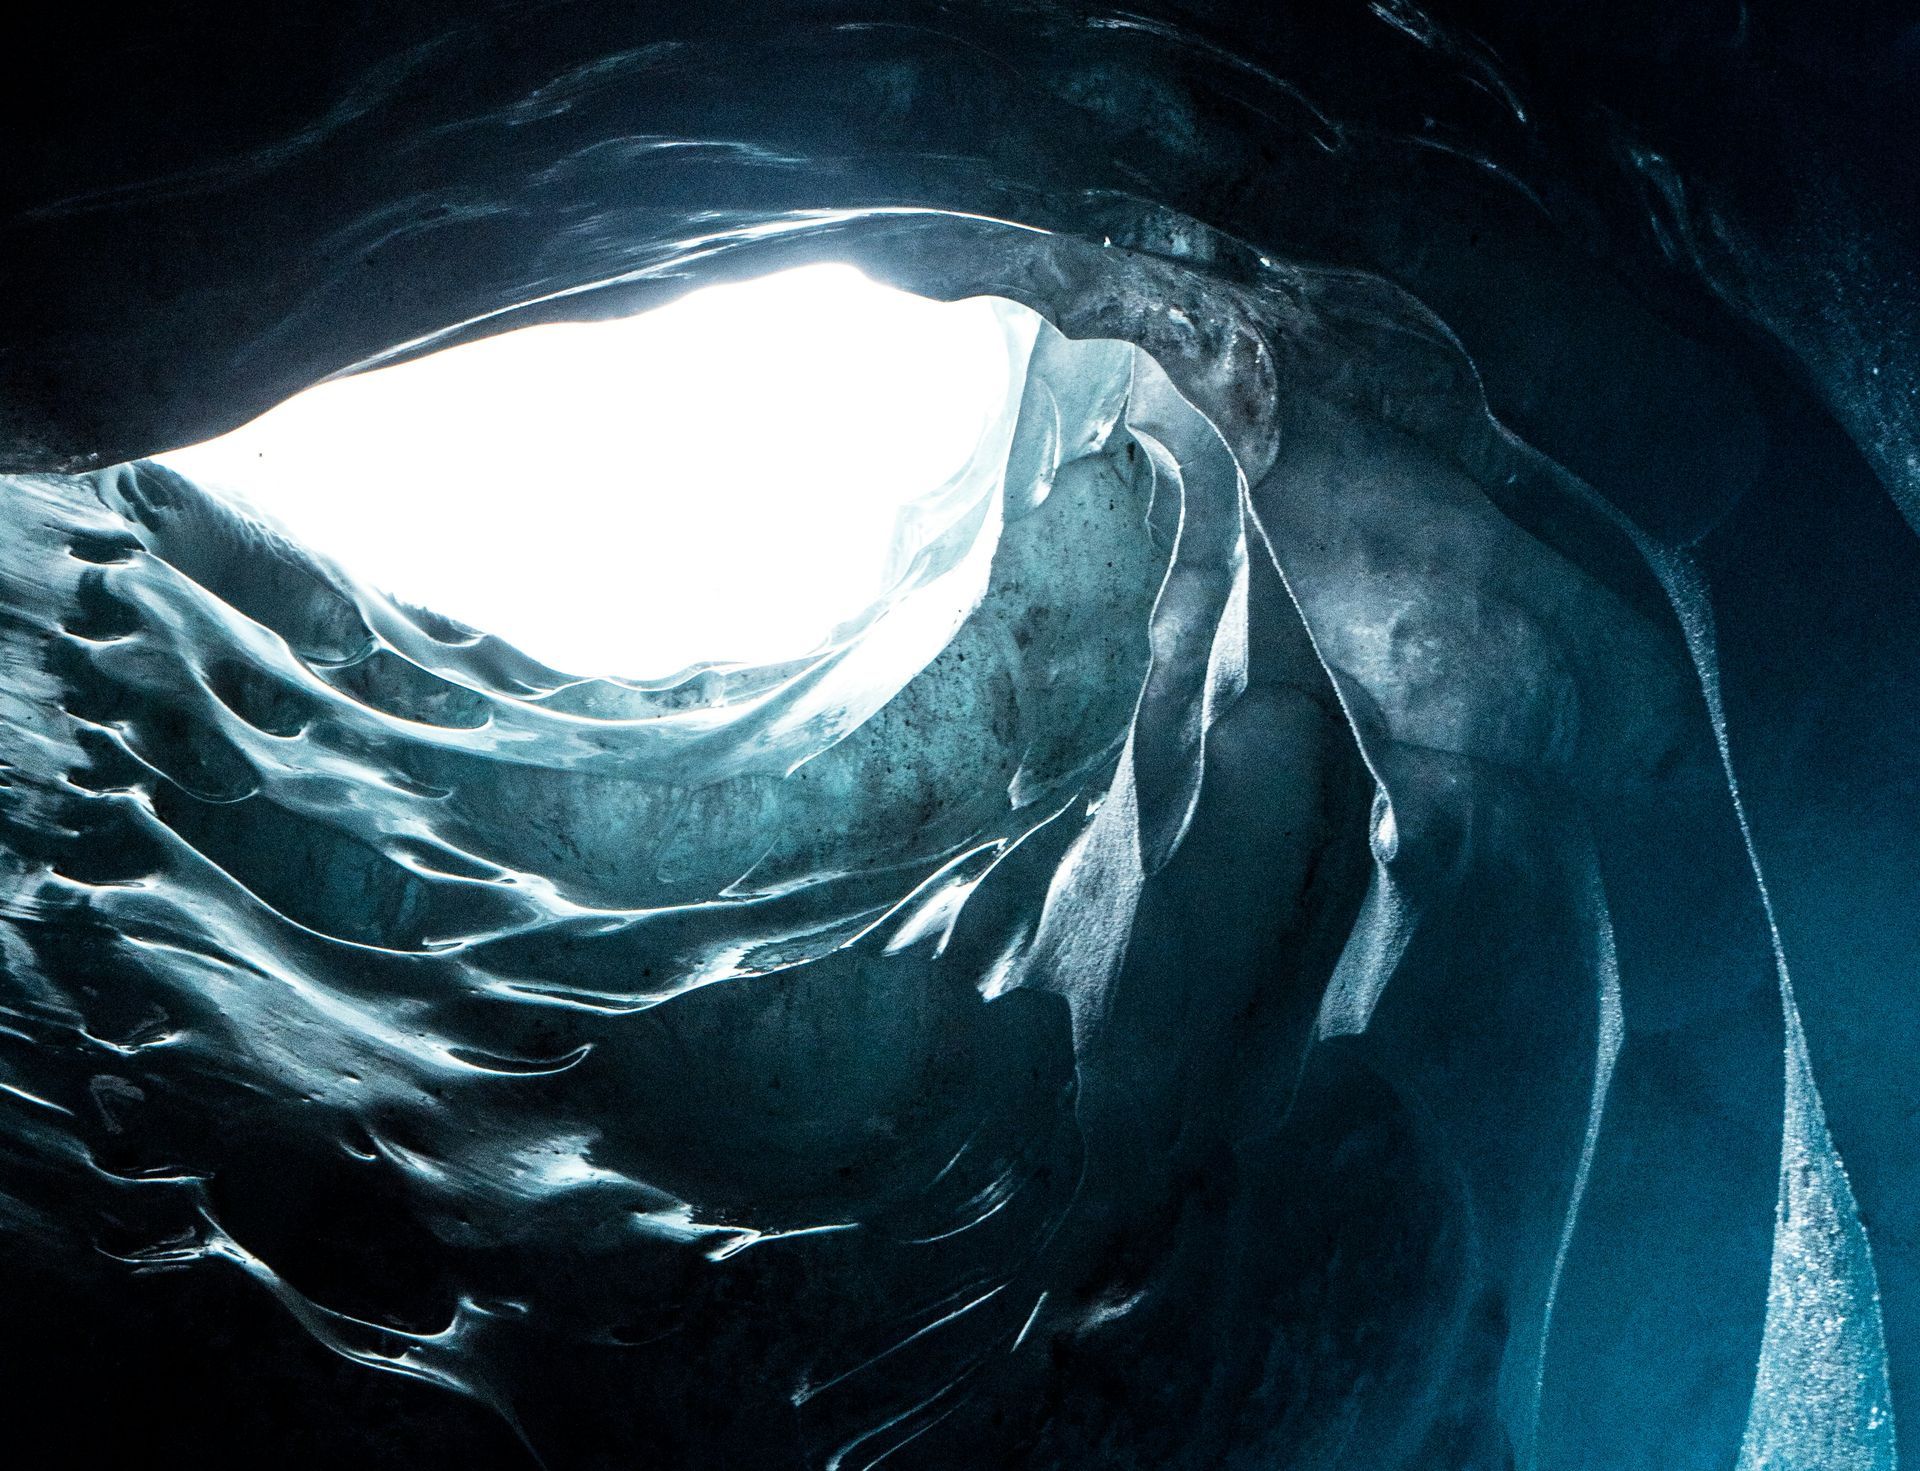 A glacial ice cave with textured walls and an opening showing light.